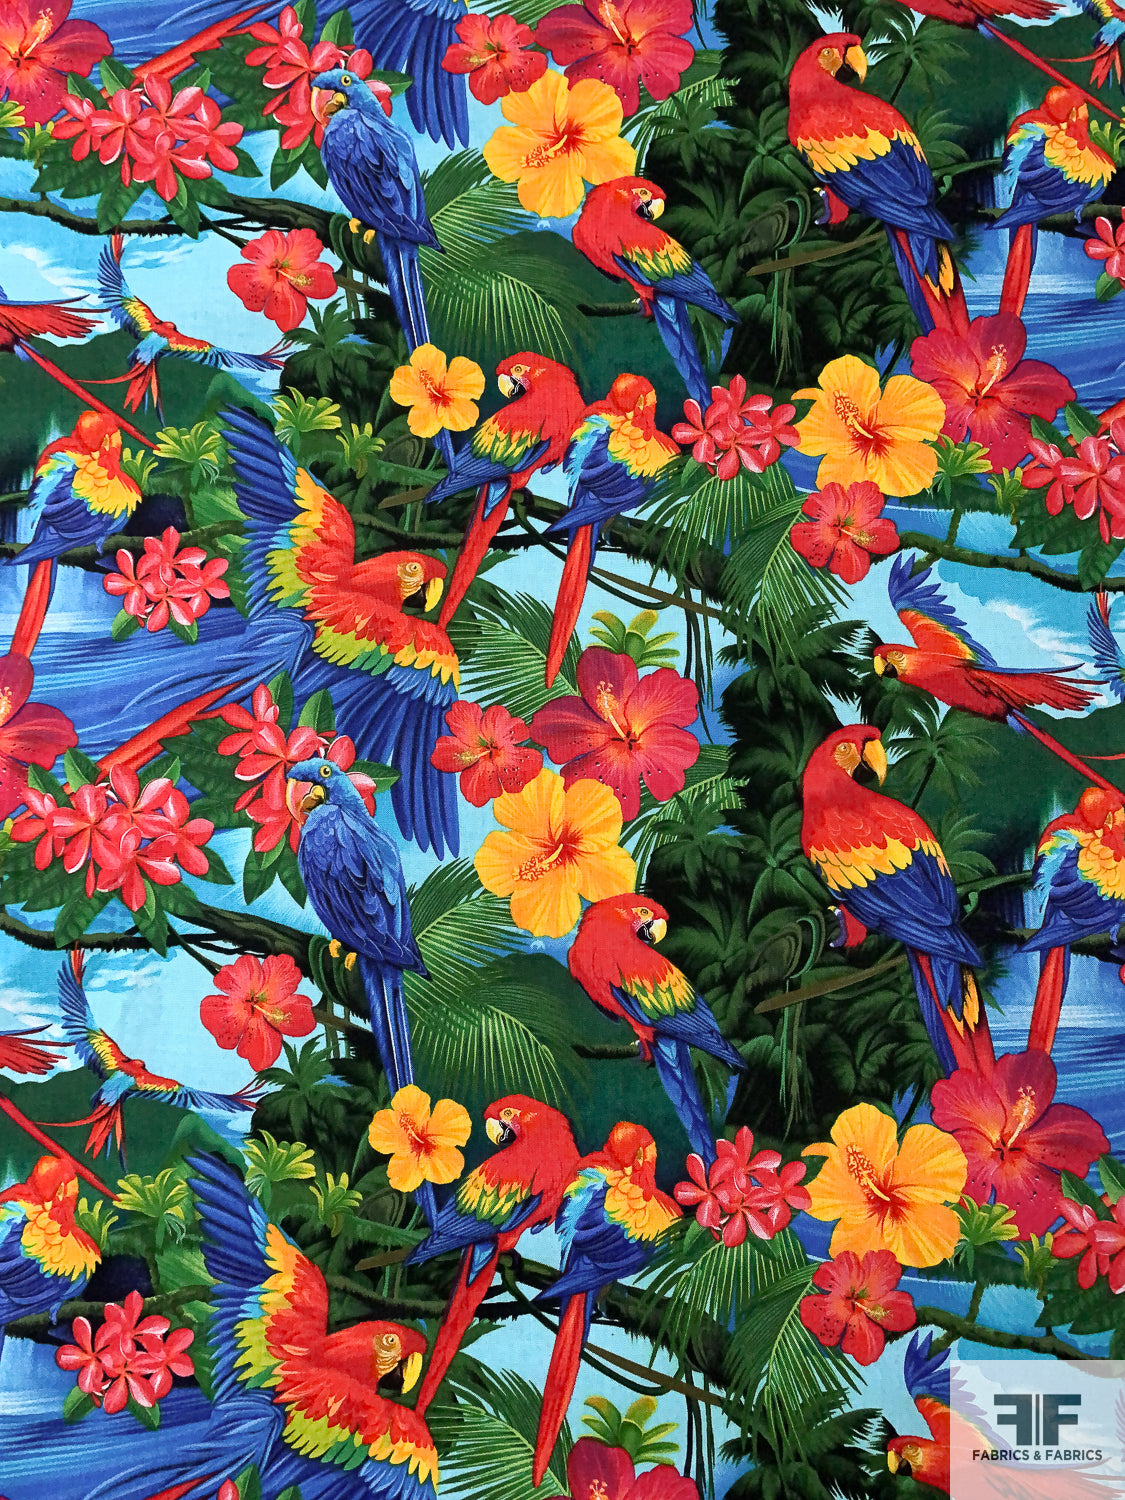 Parrots in the Tropic Printed Fused Cotton Lawn - Greens / Blues / Reds / Marigold